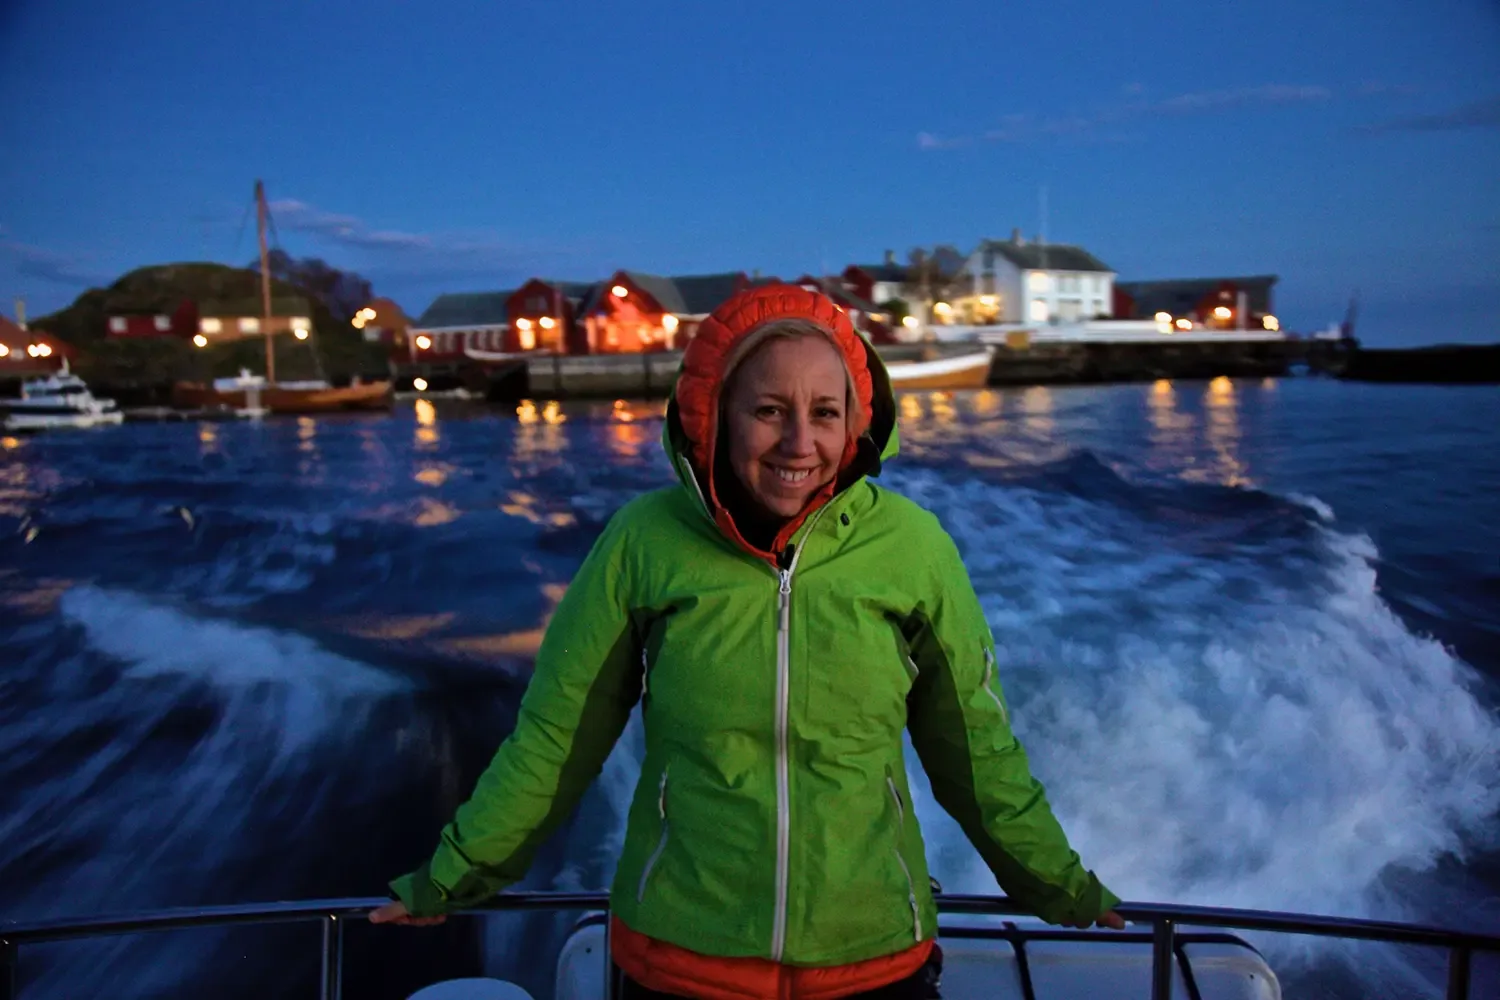 On board with LoopFilm: Filming stunning scenes on the boat in Norway’s crystal-clear waters